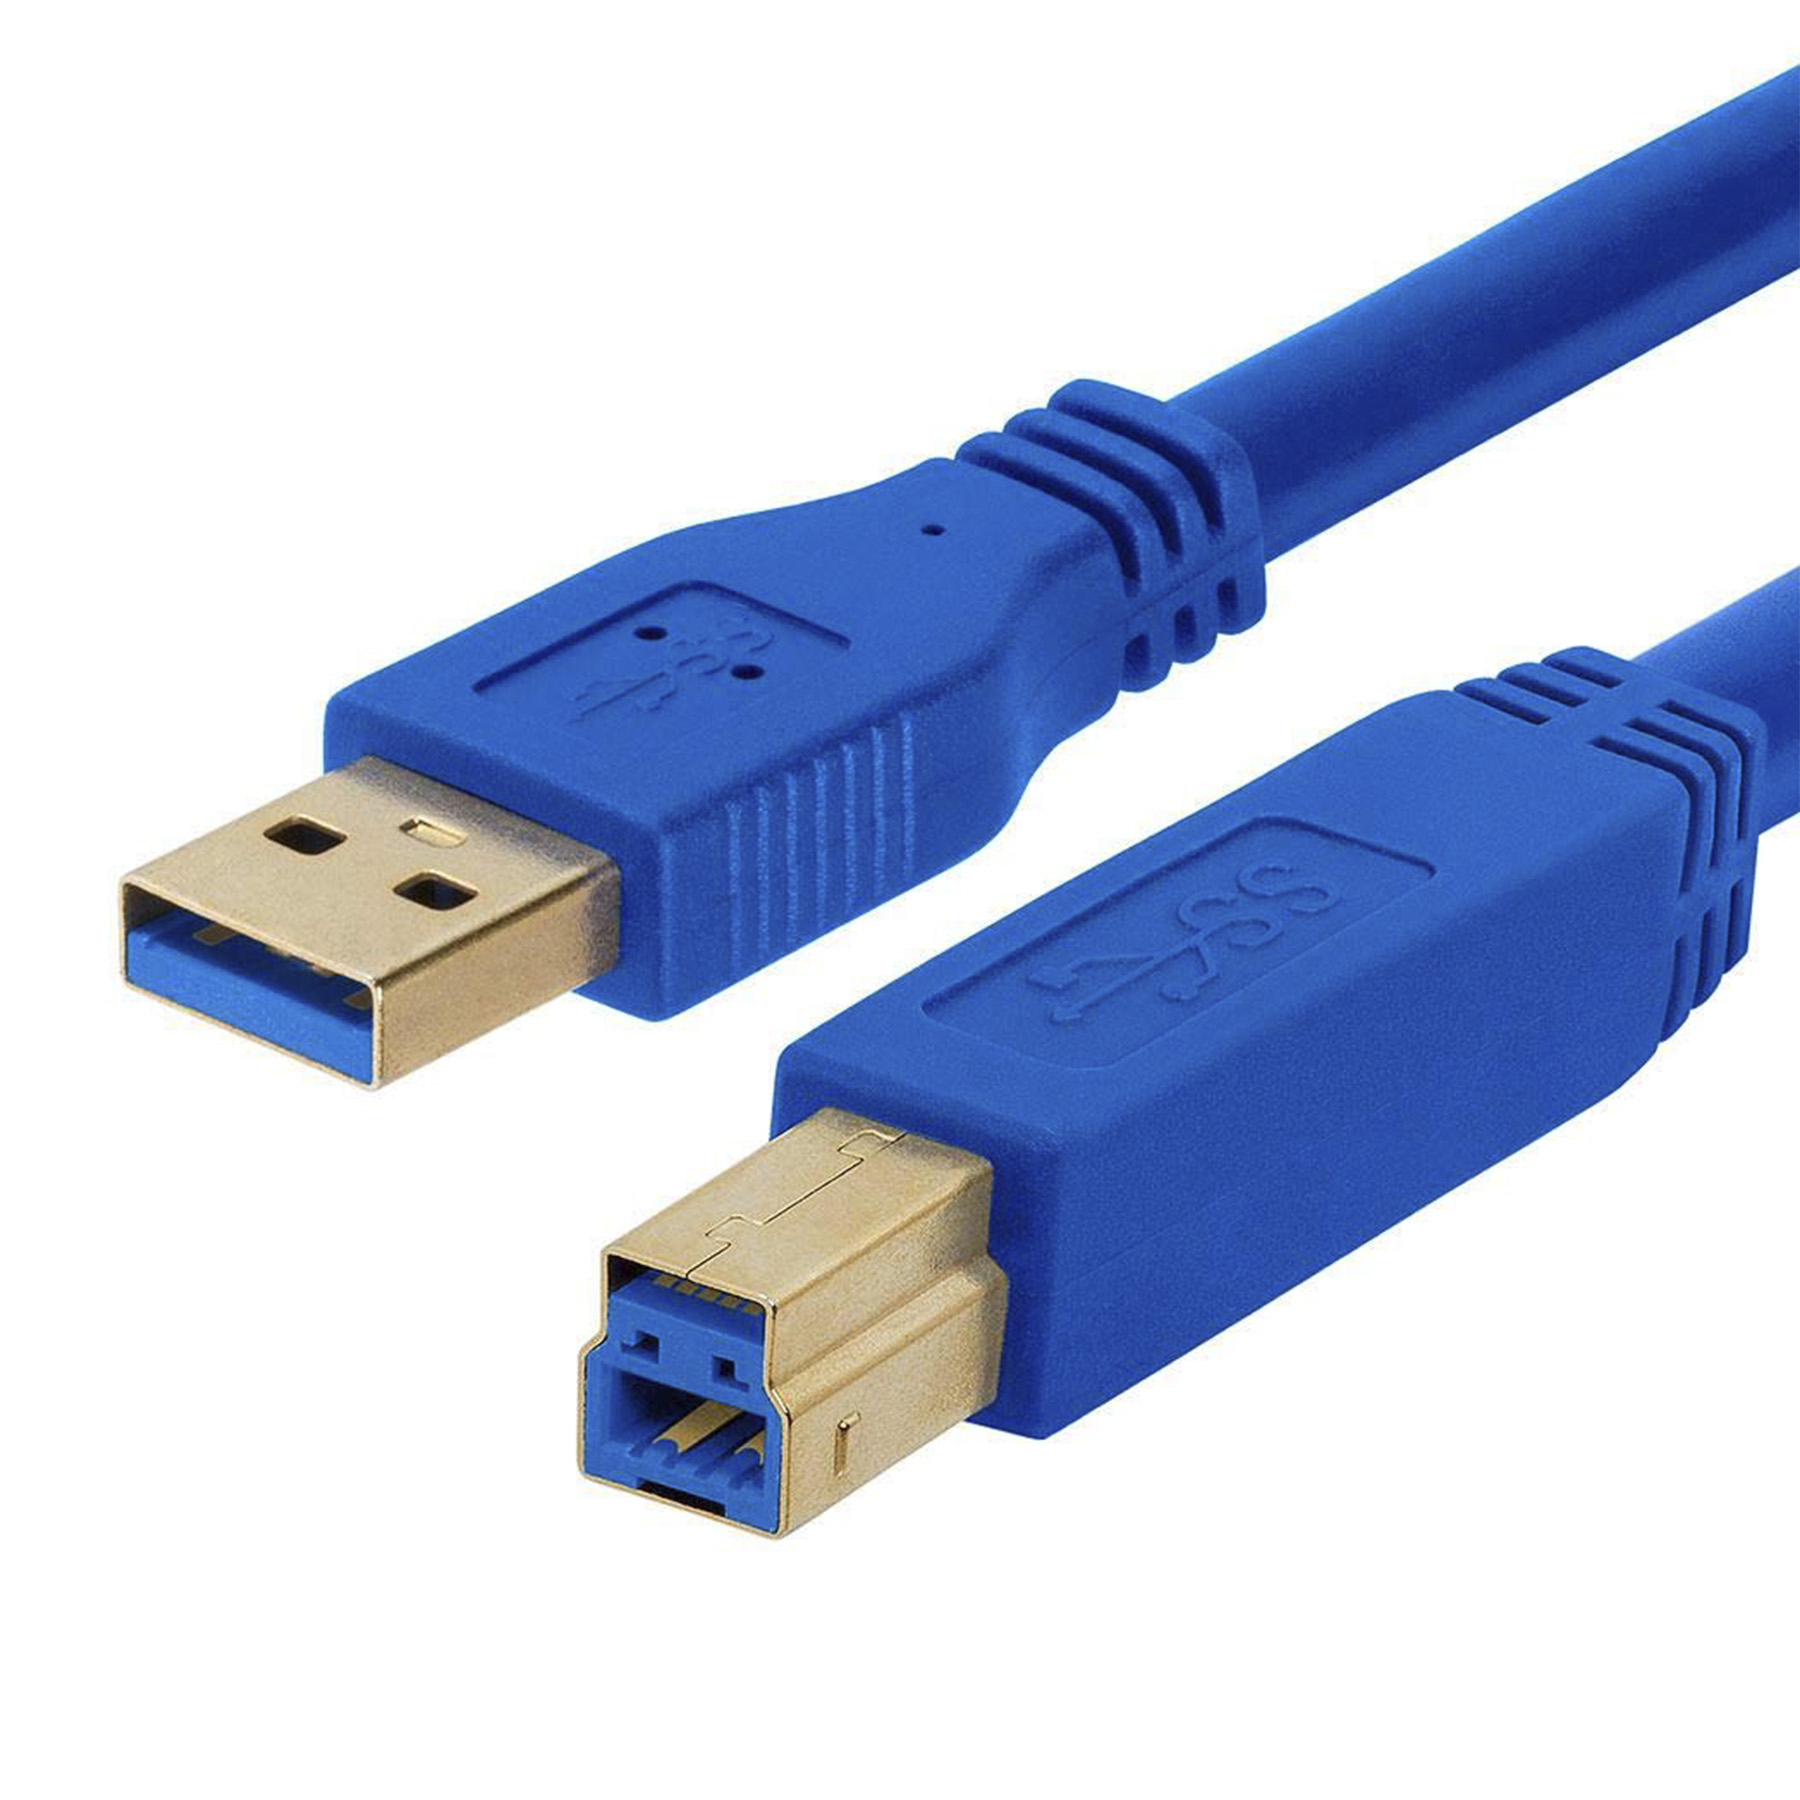 UB318 USB 3.0 Male to Male 1.8m Printer Cable